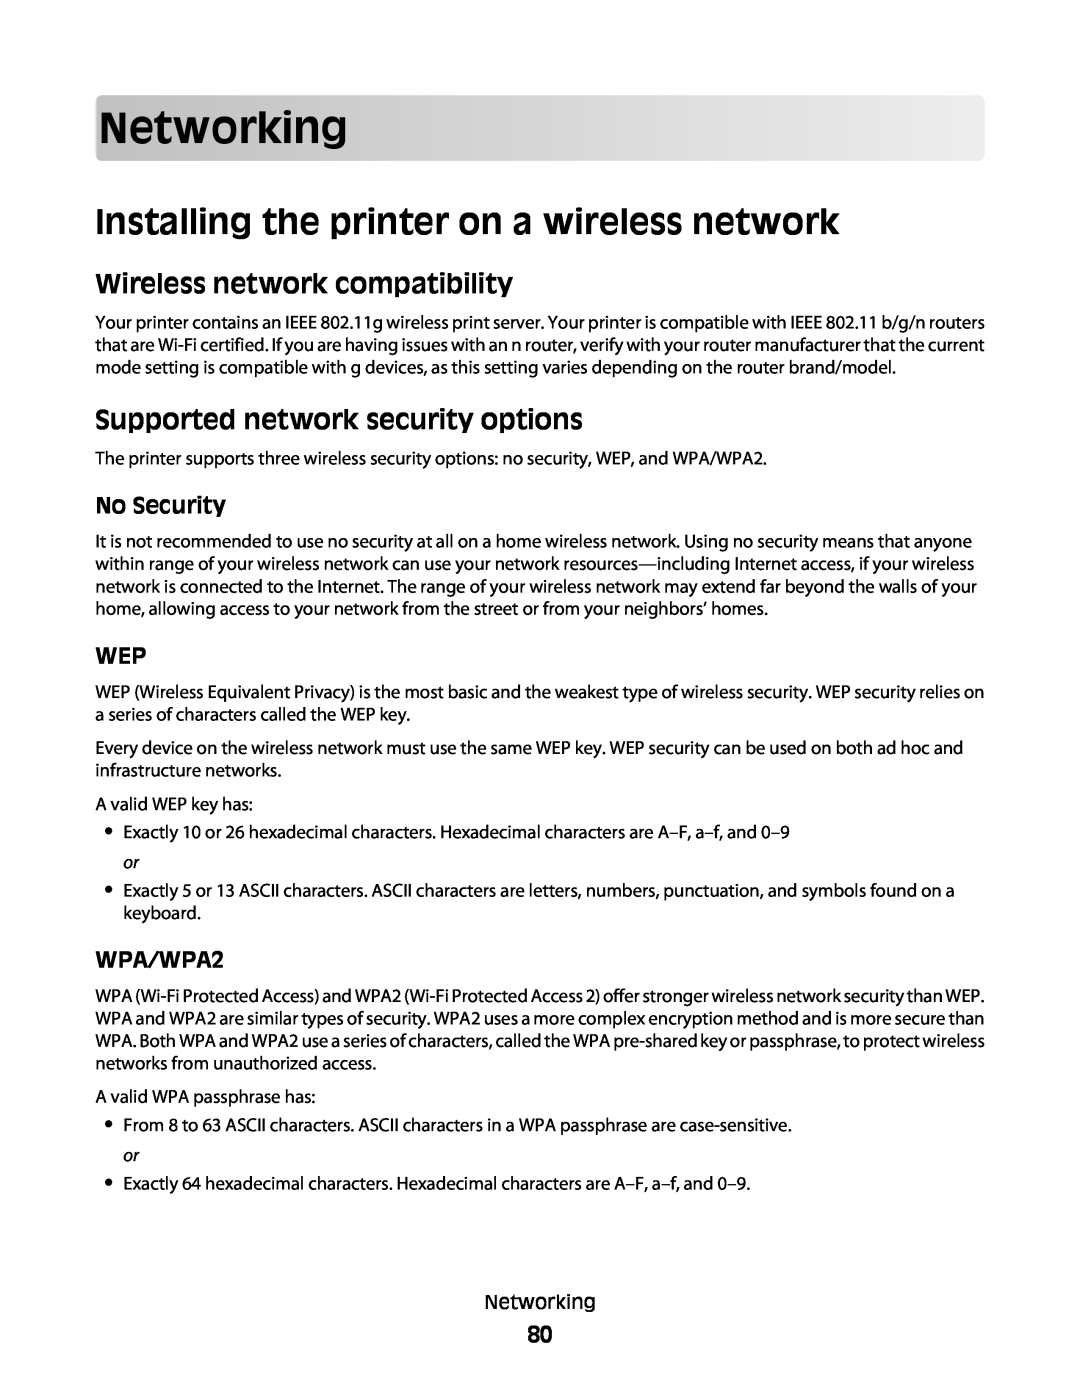 Dell V515W Networking, Installing the printer on a wireless network, Wireless network compatibility, No Security, WPA/WPA2 